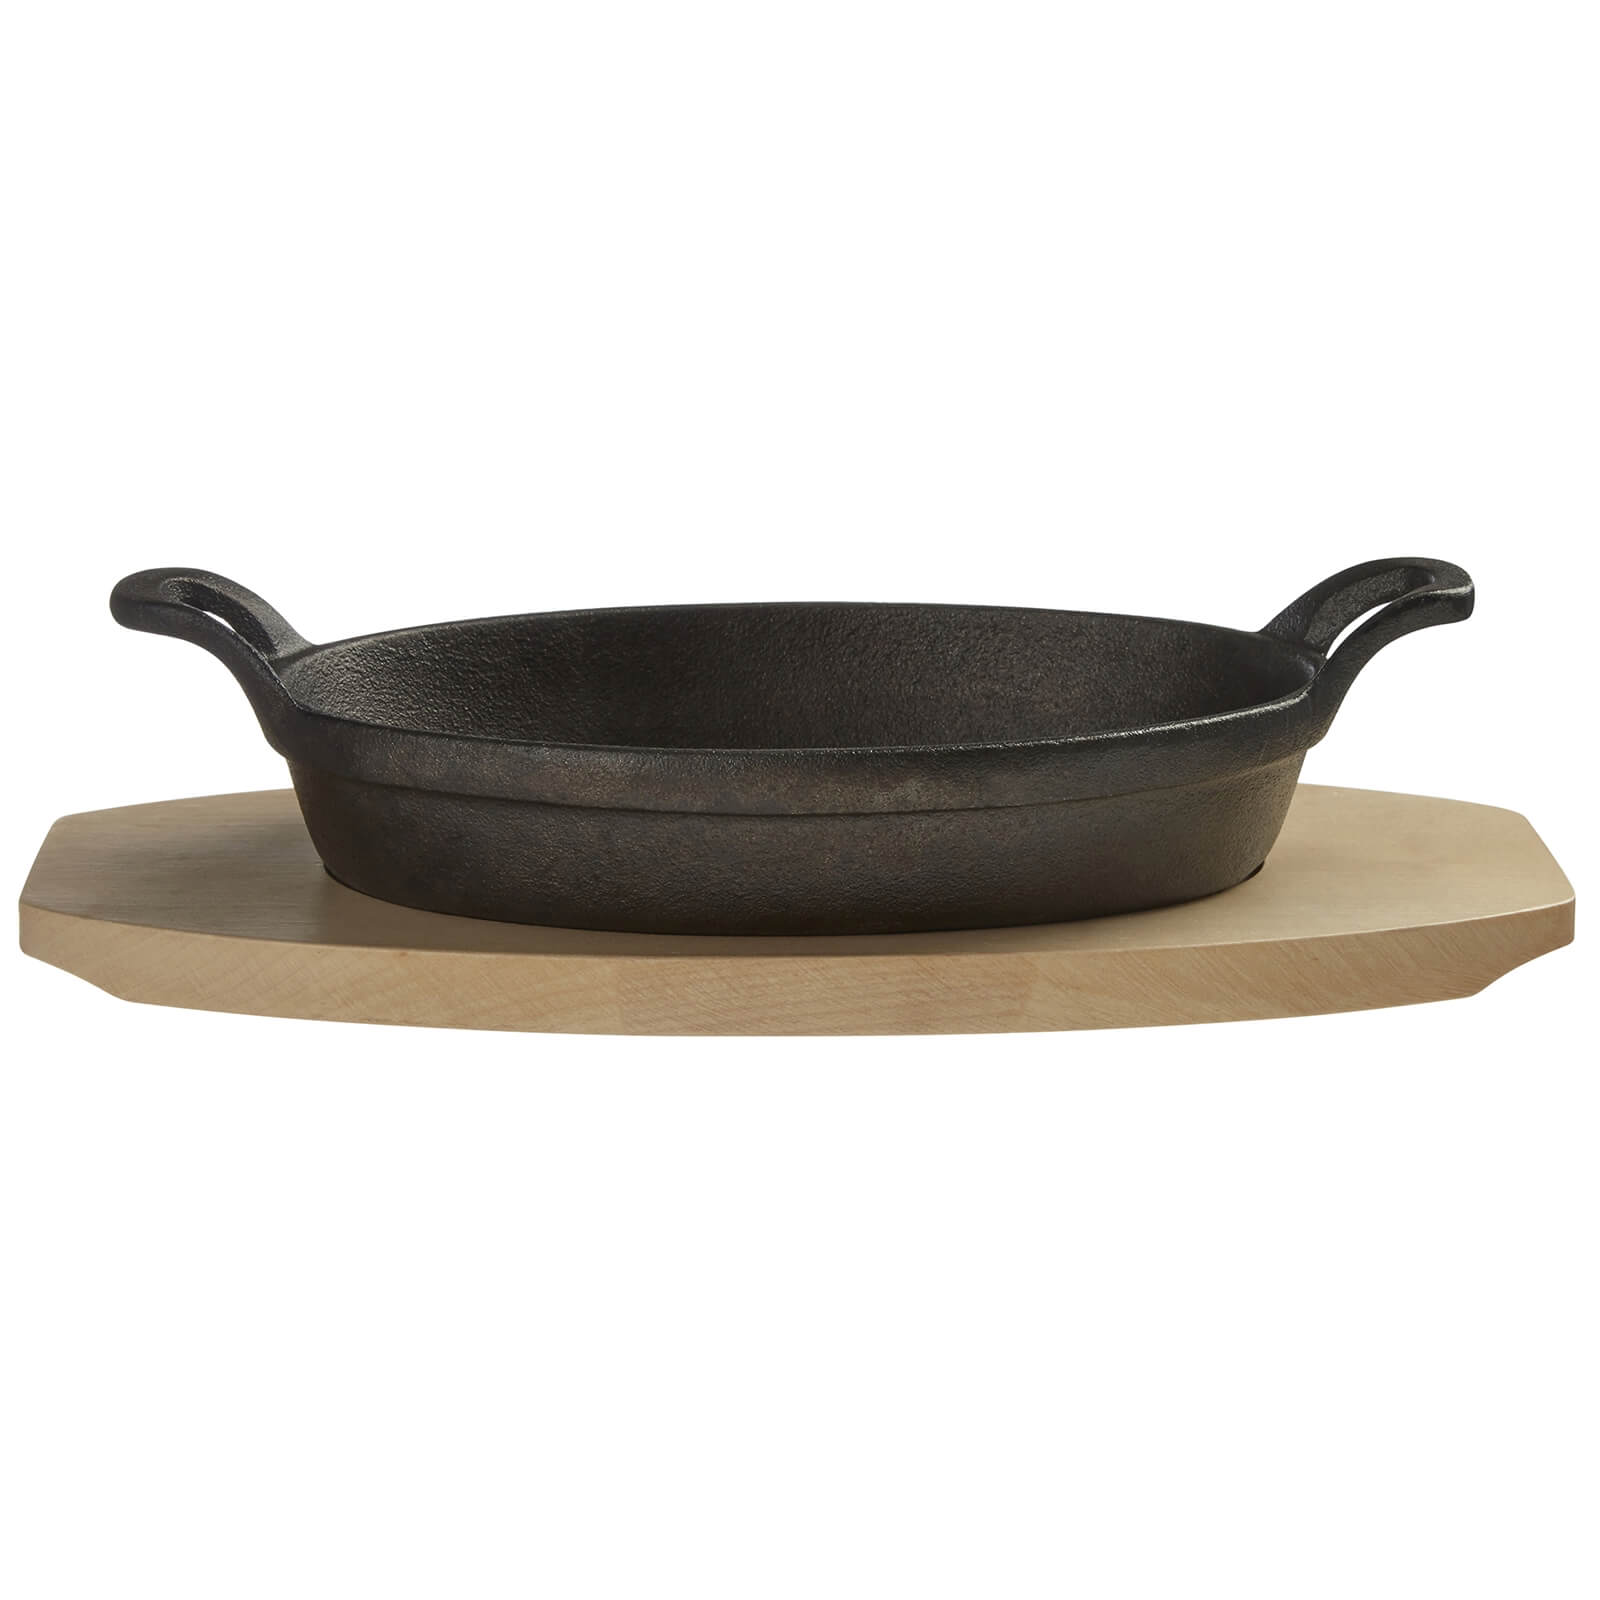 Hygge Oval Serving Dish on Wood Base